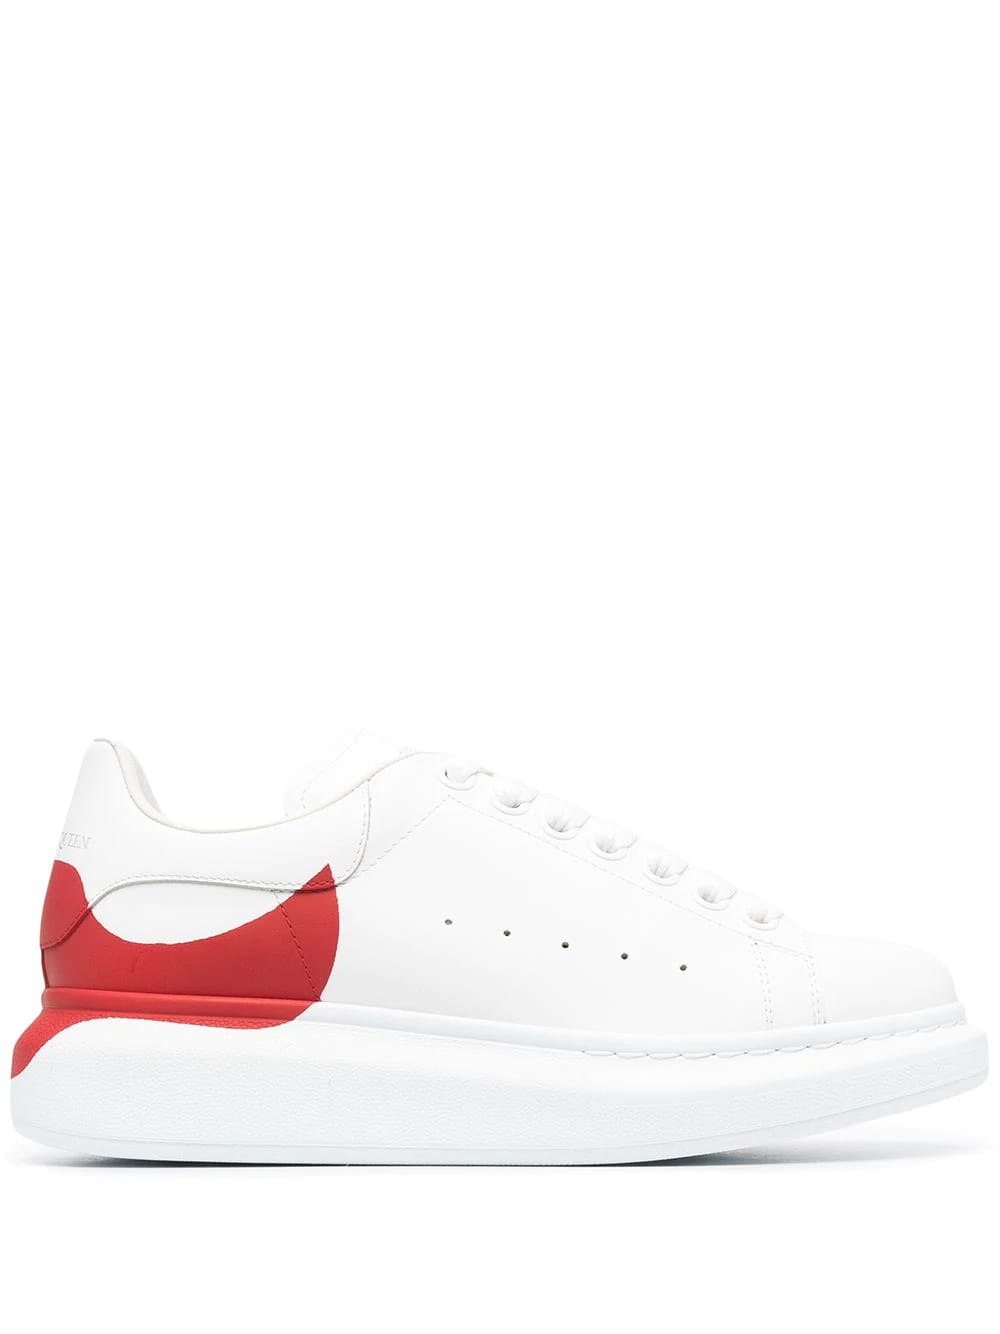 Buy Alexander McQueen Woman White Oversize Sneakers With Red Print On The Heel online, shop Alexander McQueen shoes with free shipping